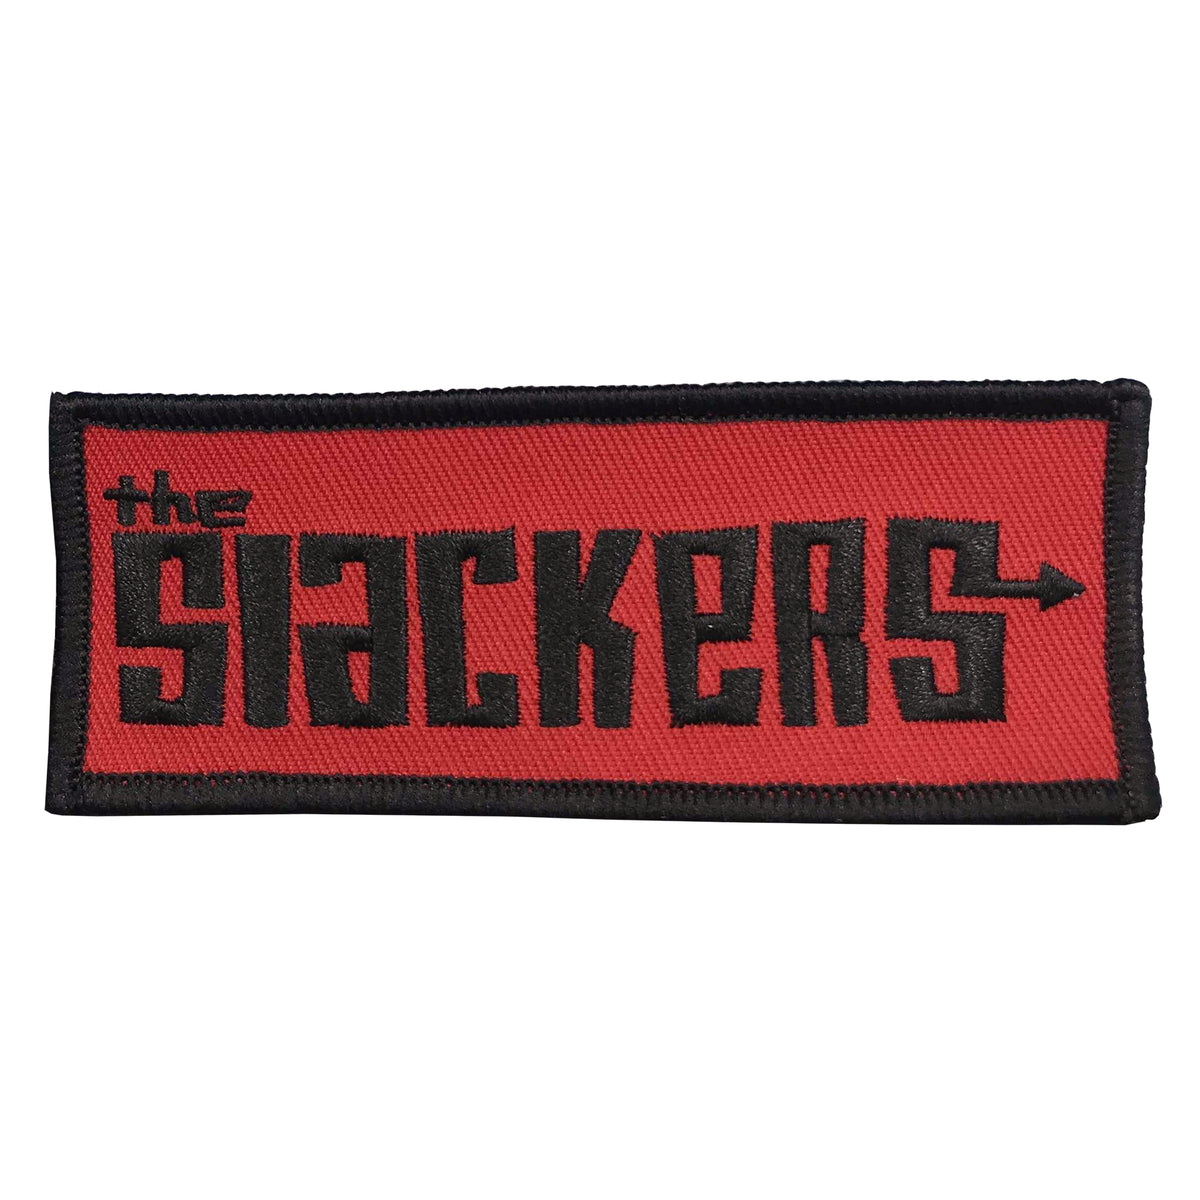 The Slackers - Text Logo - Black on Red - Patch - Embroidered - 4&quot; x 1.5&quot;